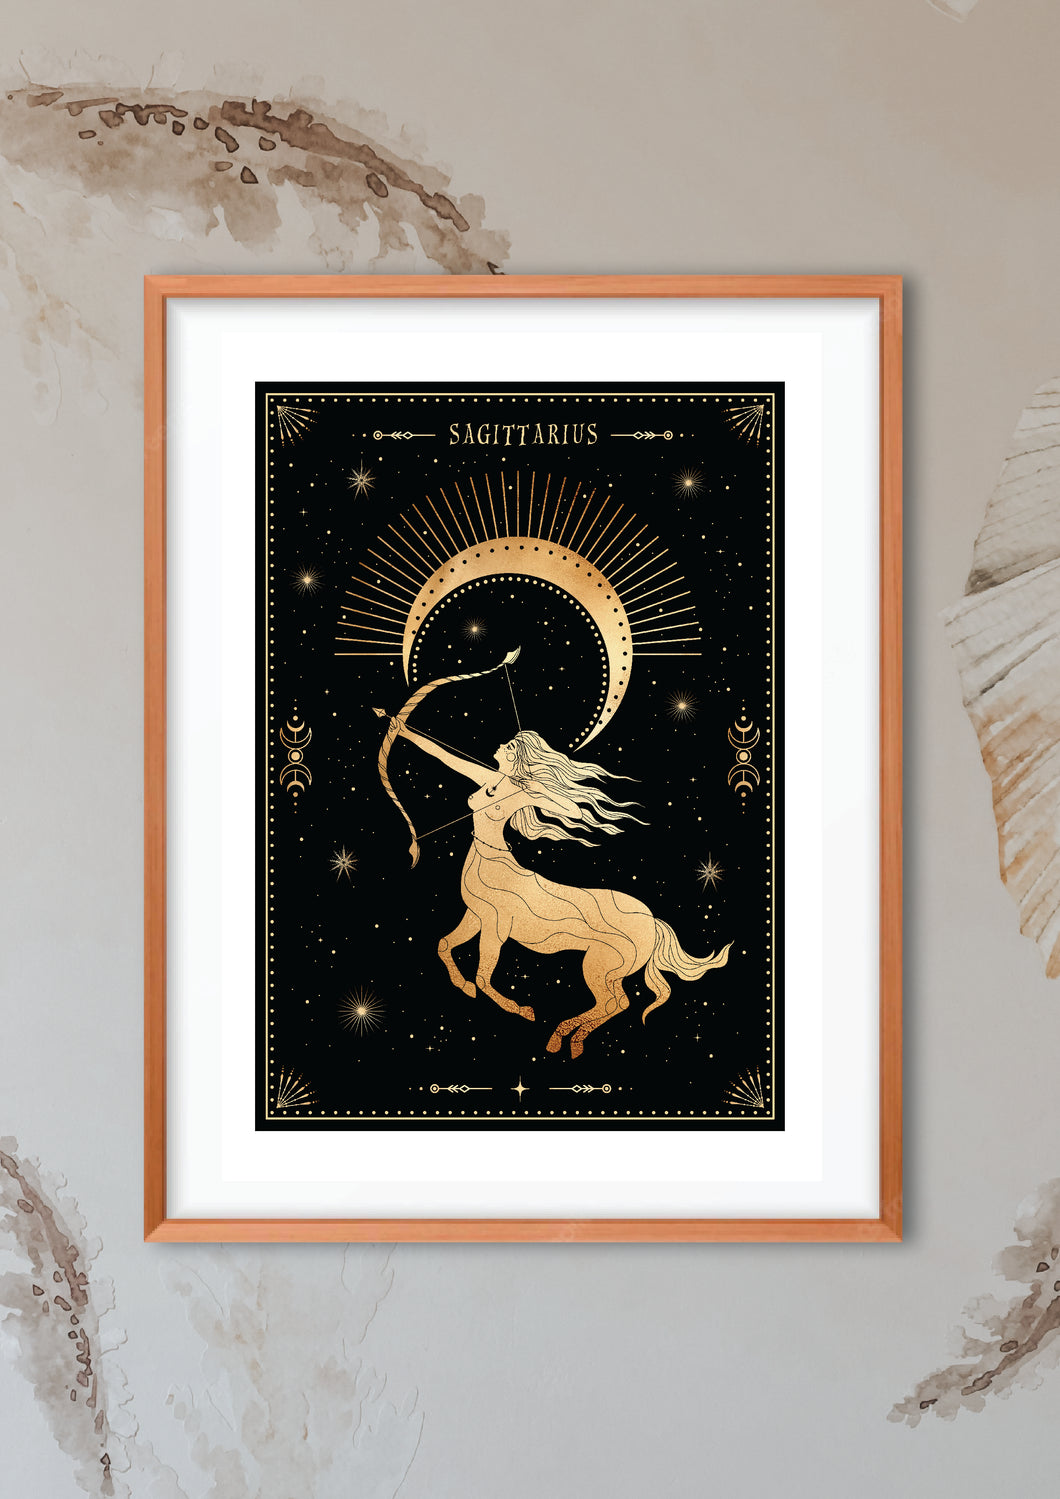 Sagittarius Zodiac Art Print. This print could fit beautifully into any room in your home. Mystical, celestial and whimsical wall art. Simply download, print and enjoy! 